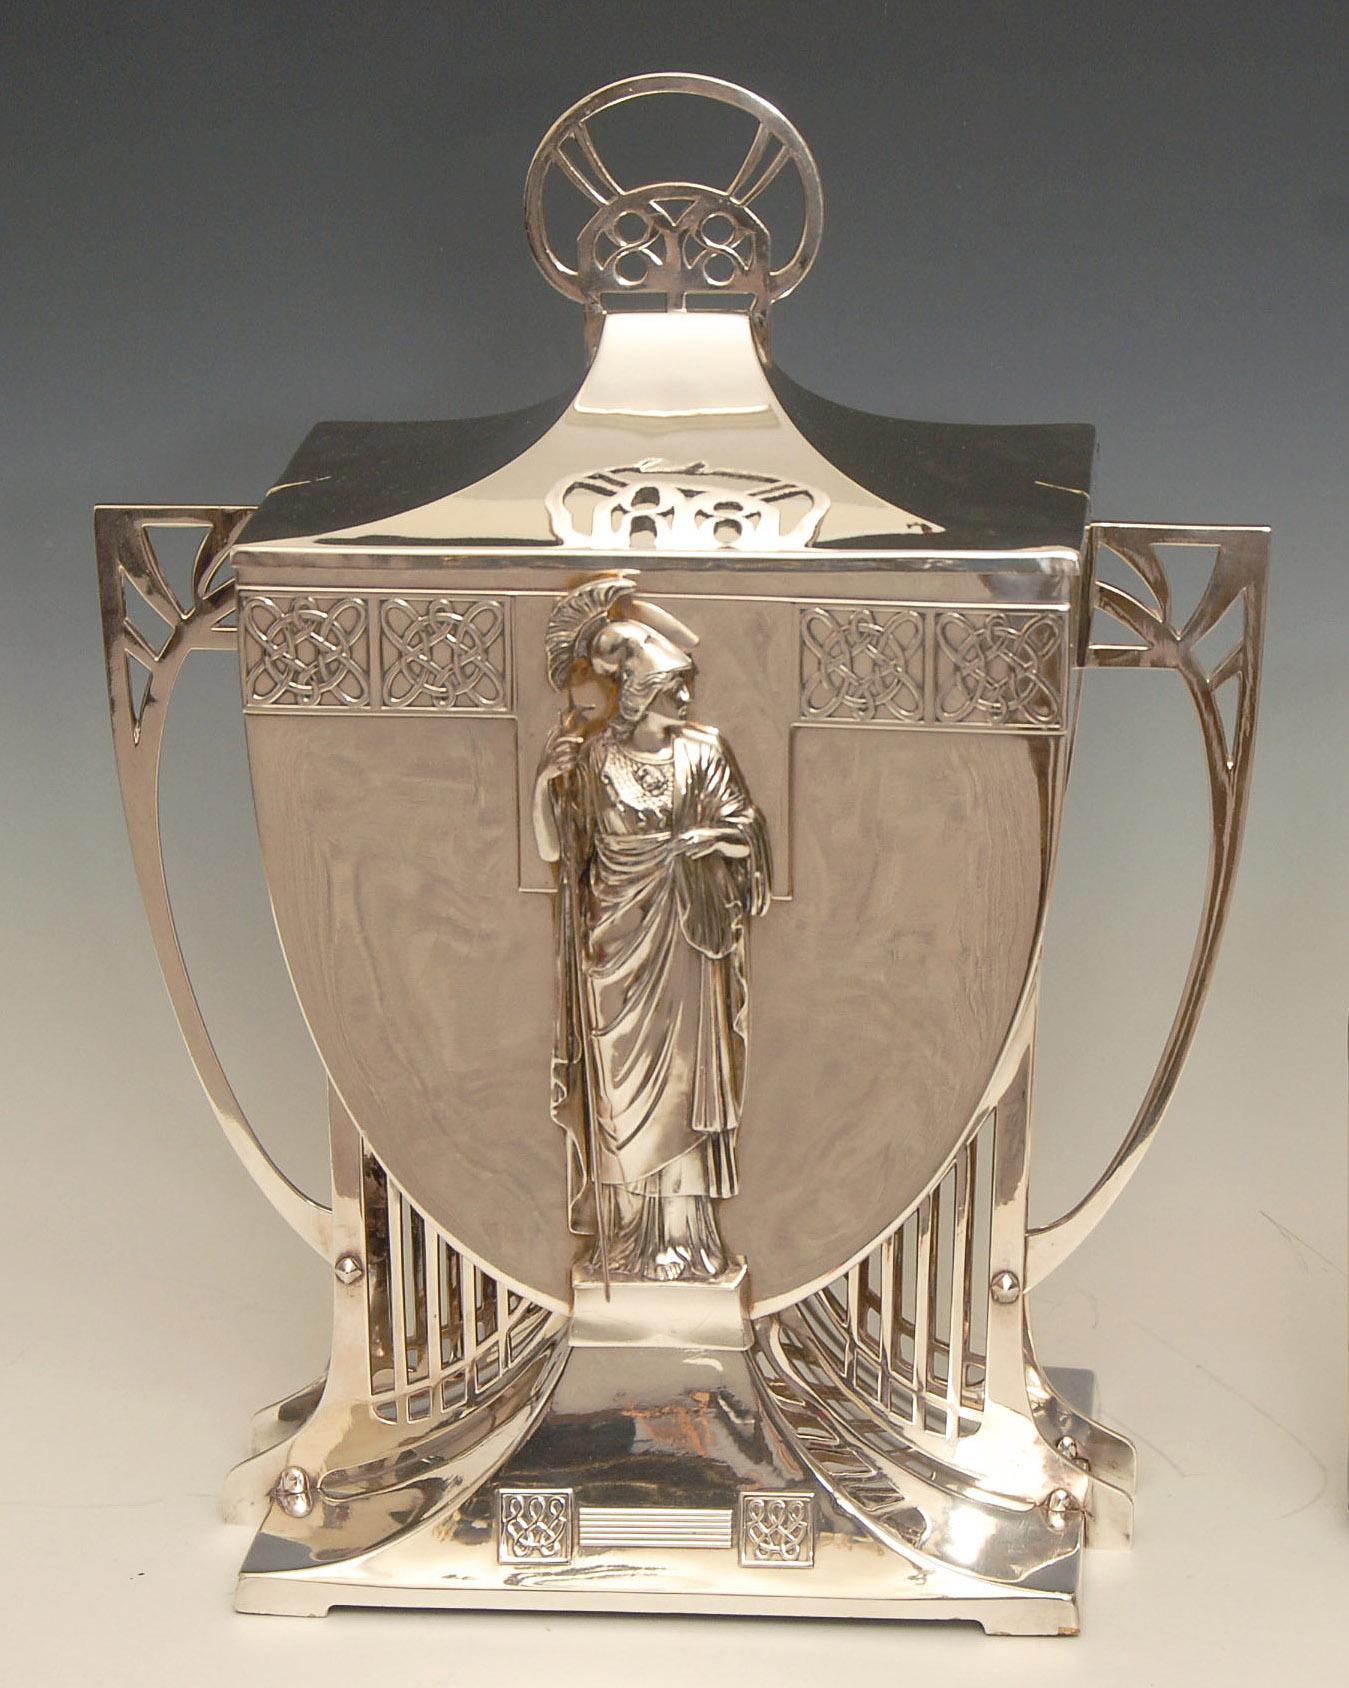 Stunning WMF Art Nouveau Ice Bucket / Centrepiece with lid depicting a female warrior with spear.
Made by the WÜRTTEMBERGISCHE METALLWARENFABRIK factory in Germany around 1910 possible as an exhibition piece.

20 inches high, price includes free